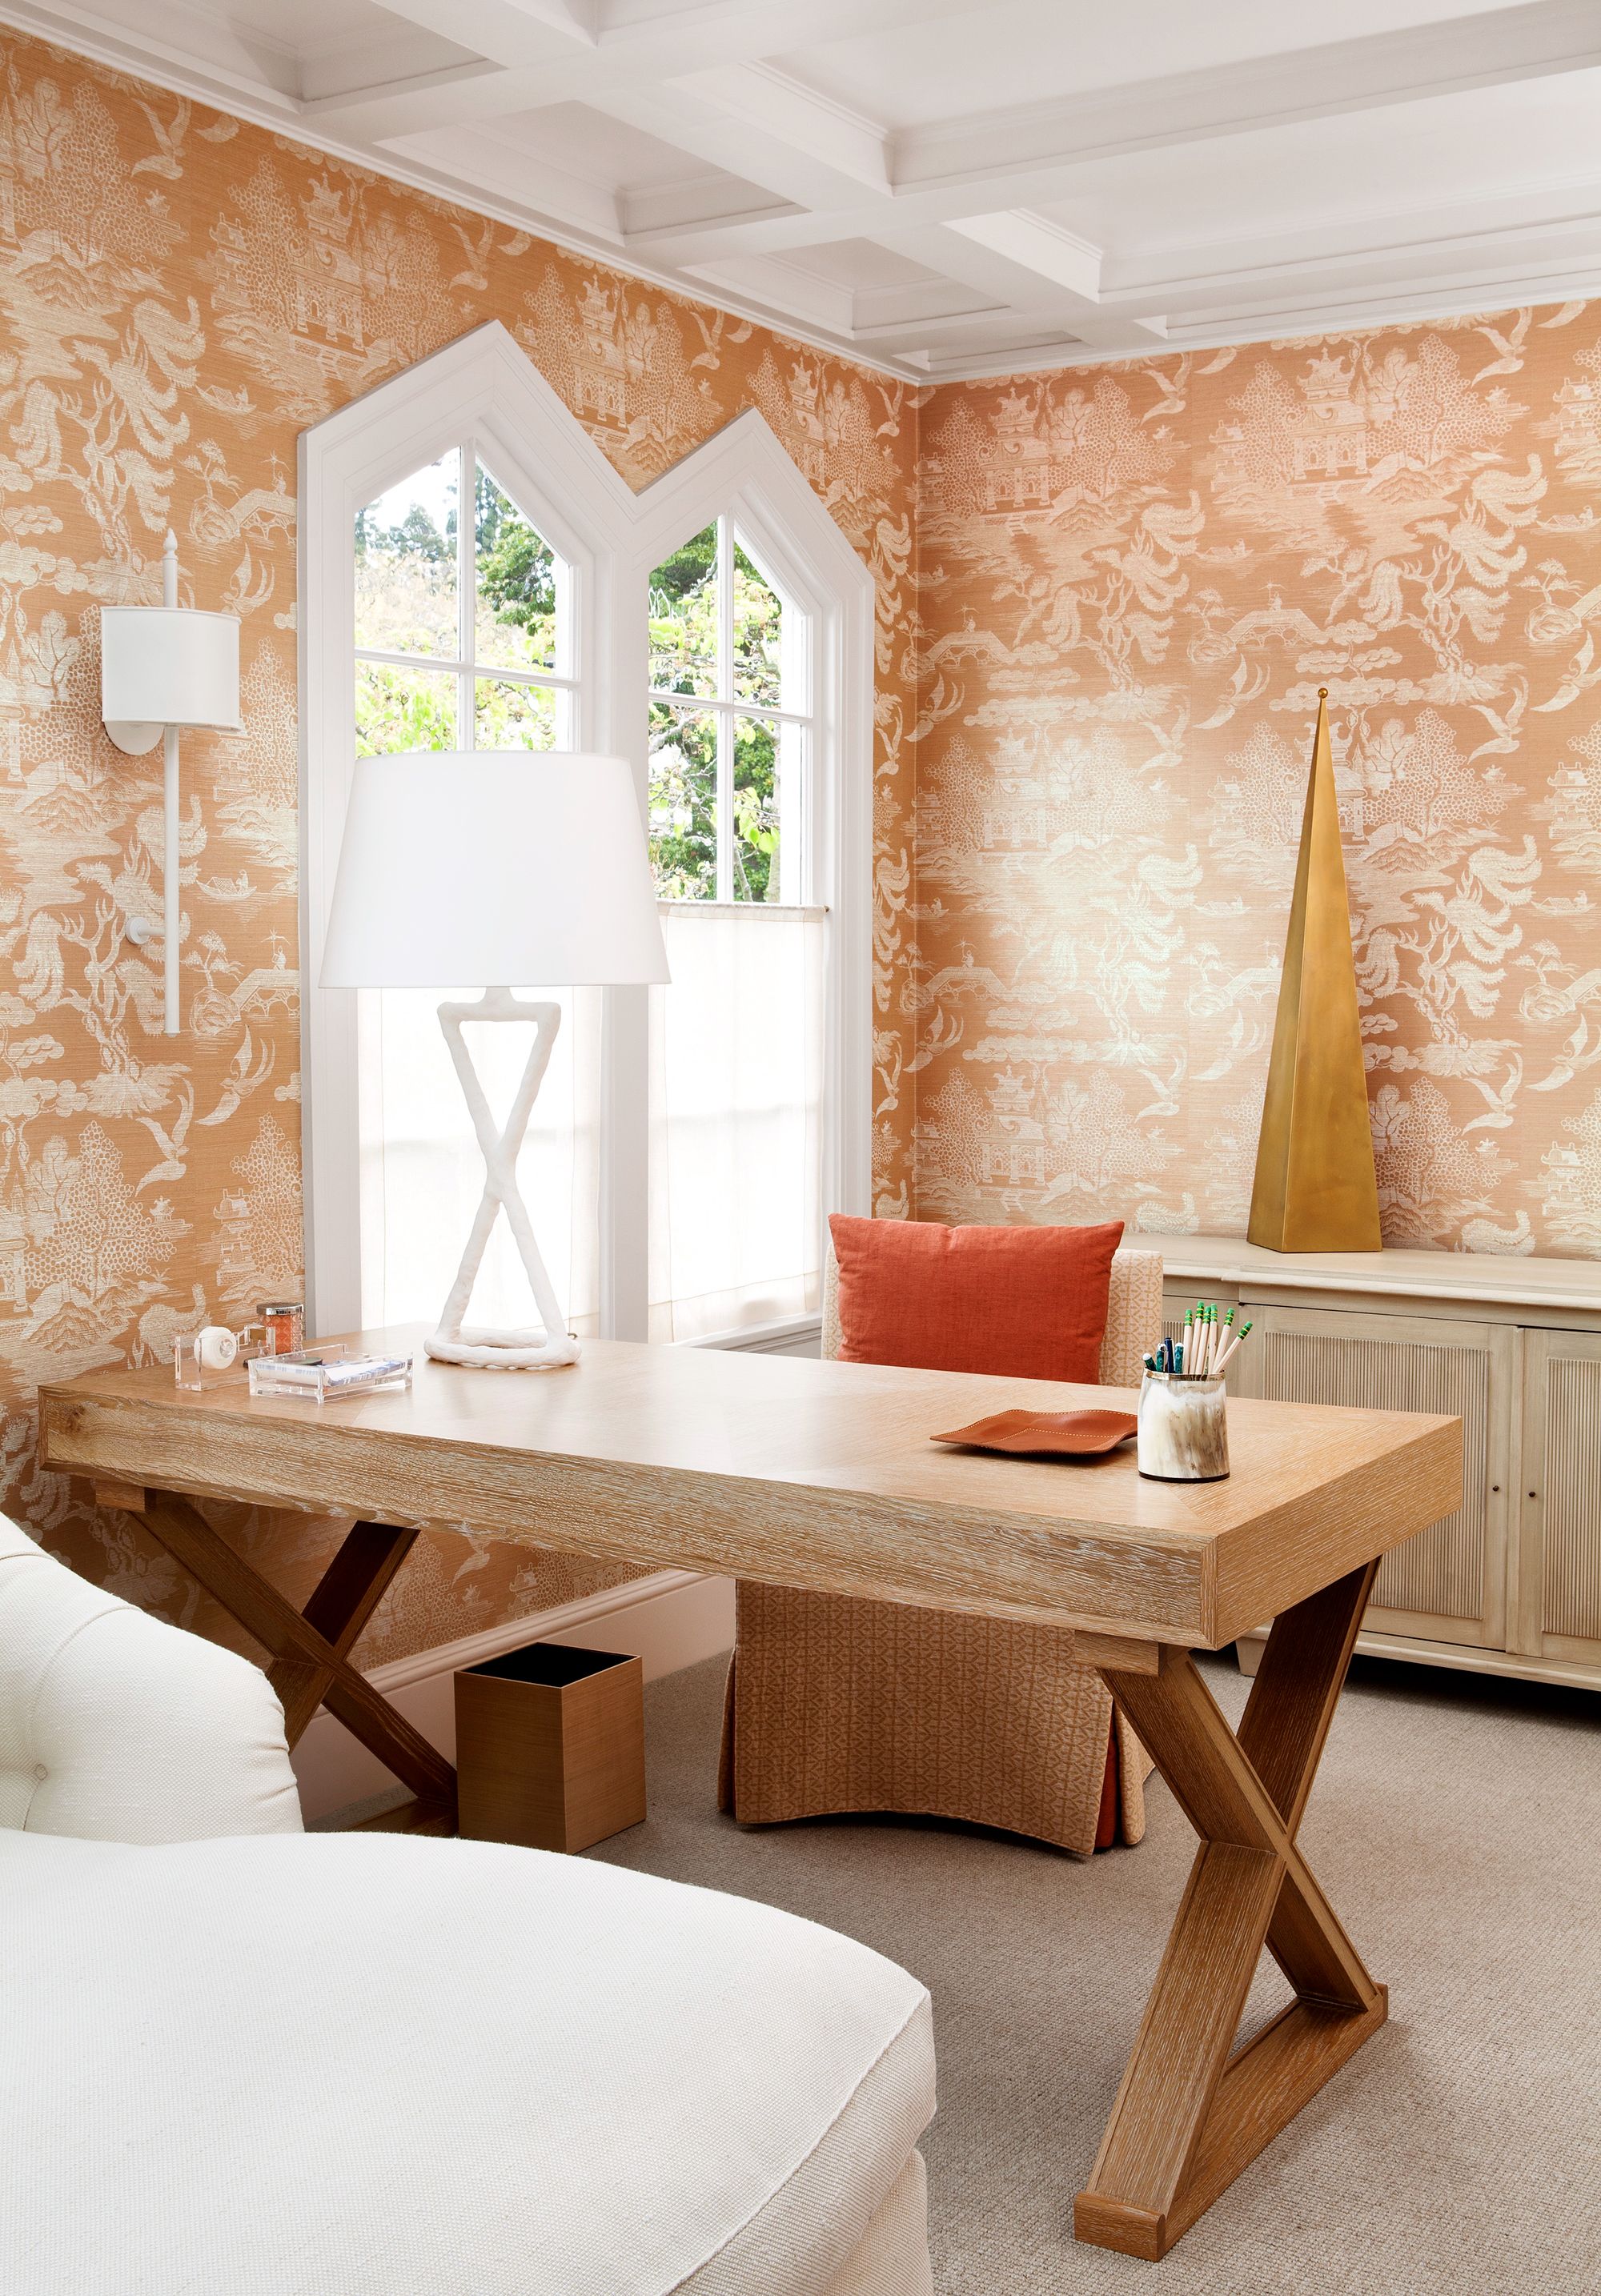 The Case for Grasscloth Wallpaper and a Little Design Inspiration  Sara  Langley